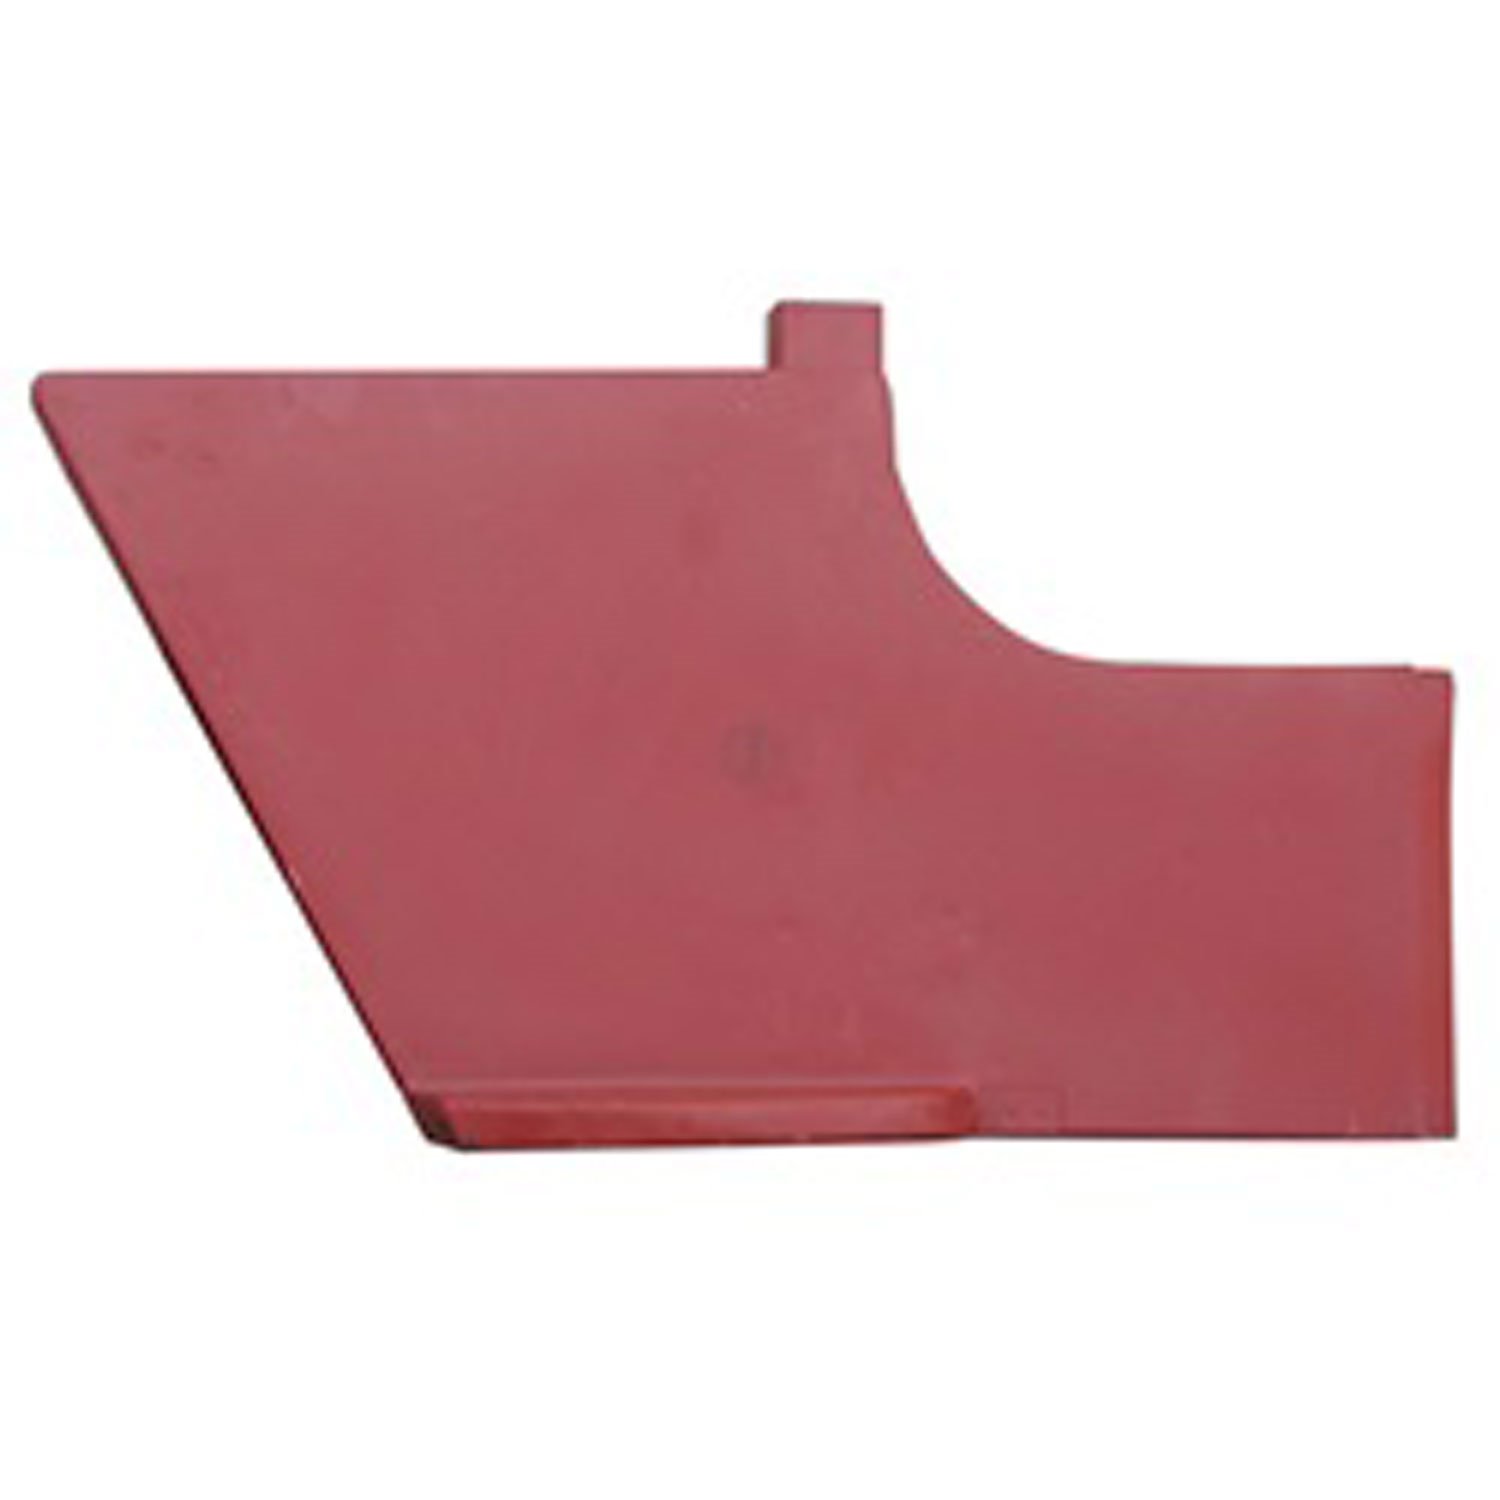 This right cowl side panel from Omix-ADA fits 41-45 Willys MB and Ford GPW. Includes the step.